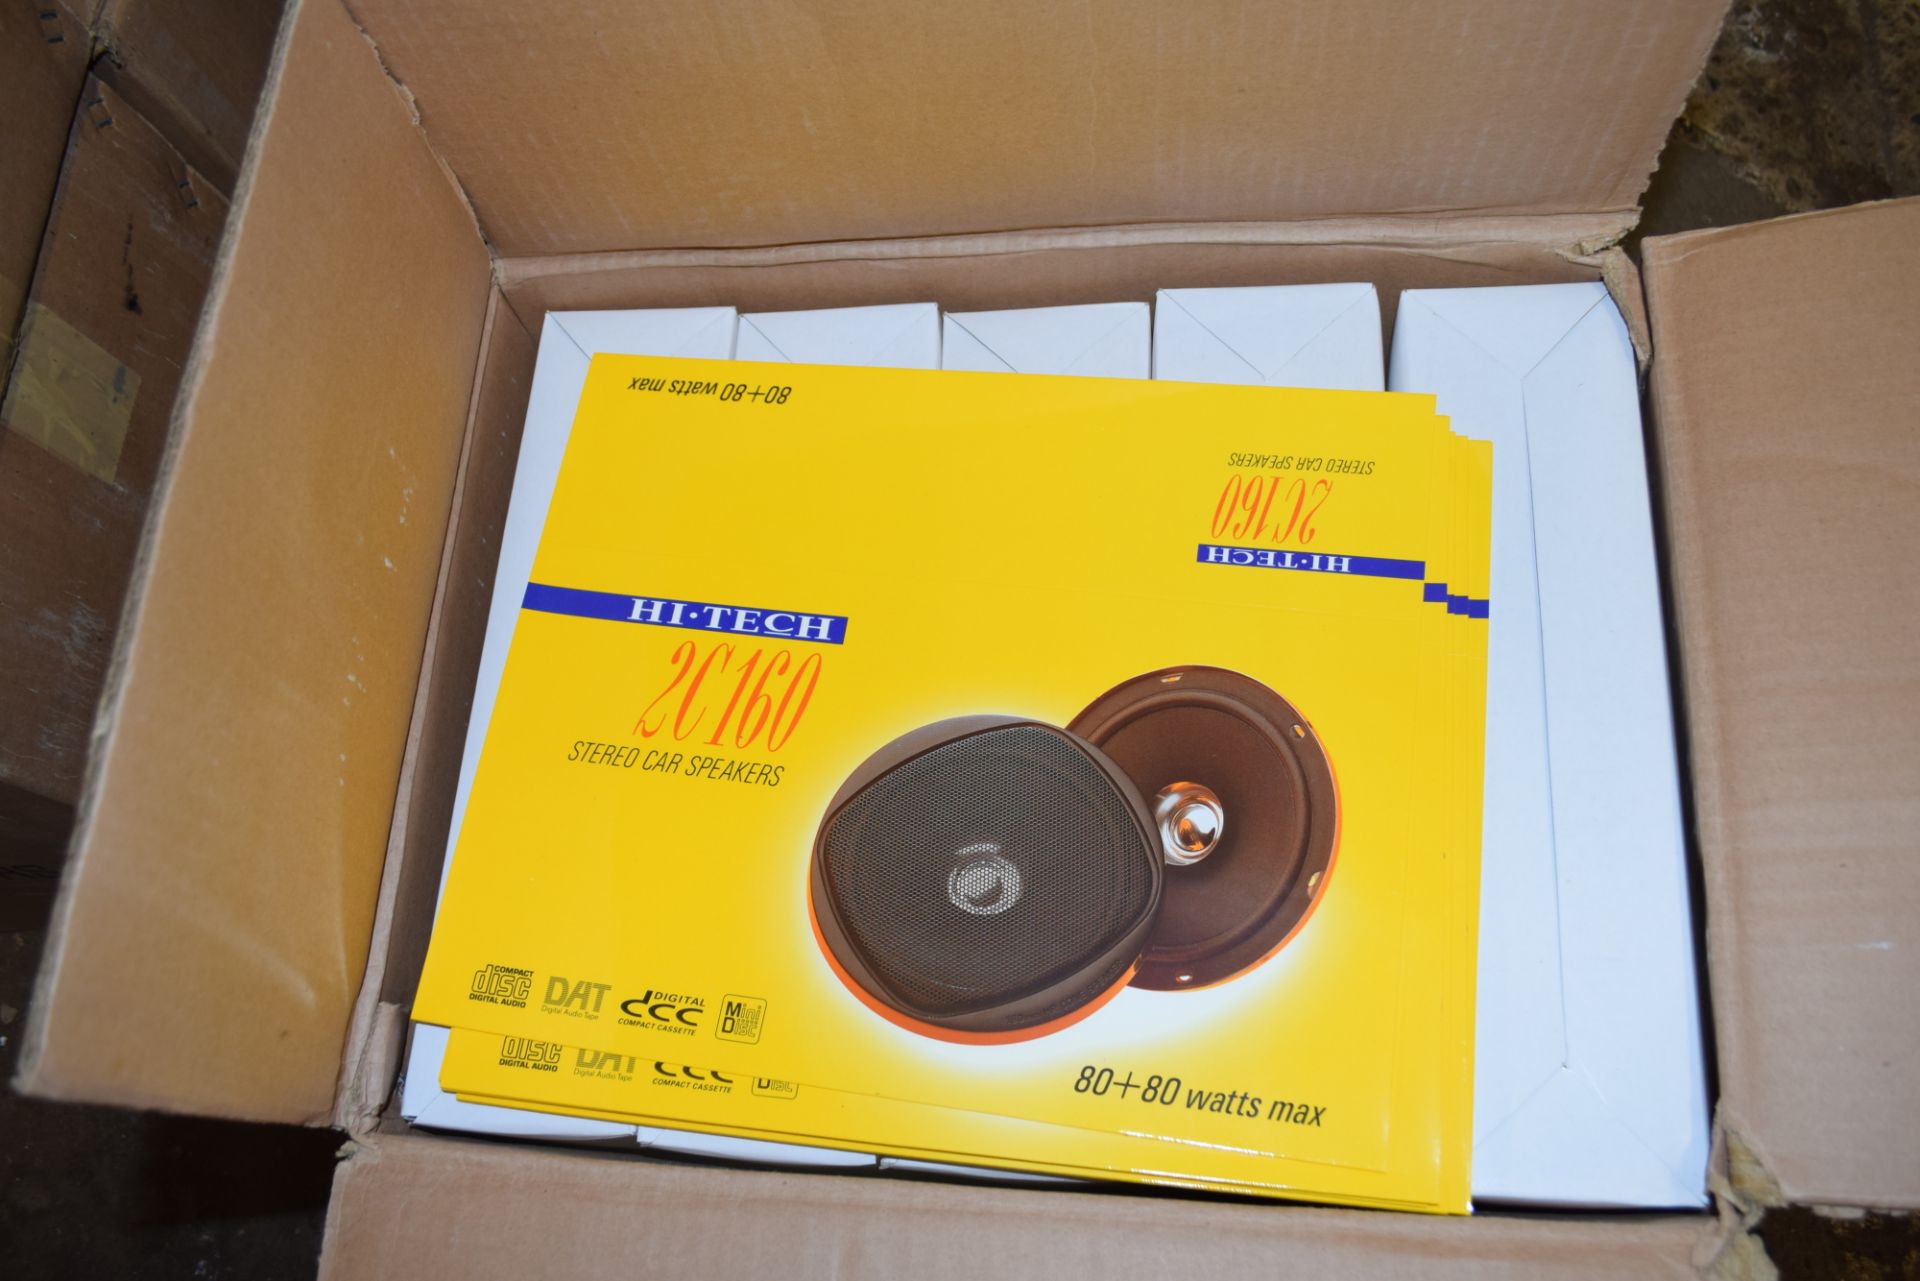 BOX CONTAINING 10 PAIRS OF HI TECH STEREO CAR SPEAKERS, MODEL NO 2C160, SIZE 6 1/2 INCH, POWER - Image 3 of 4